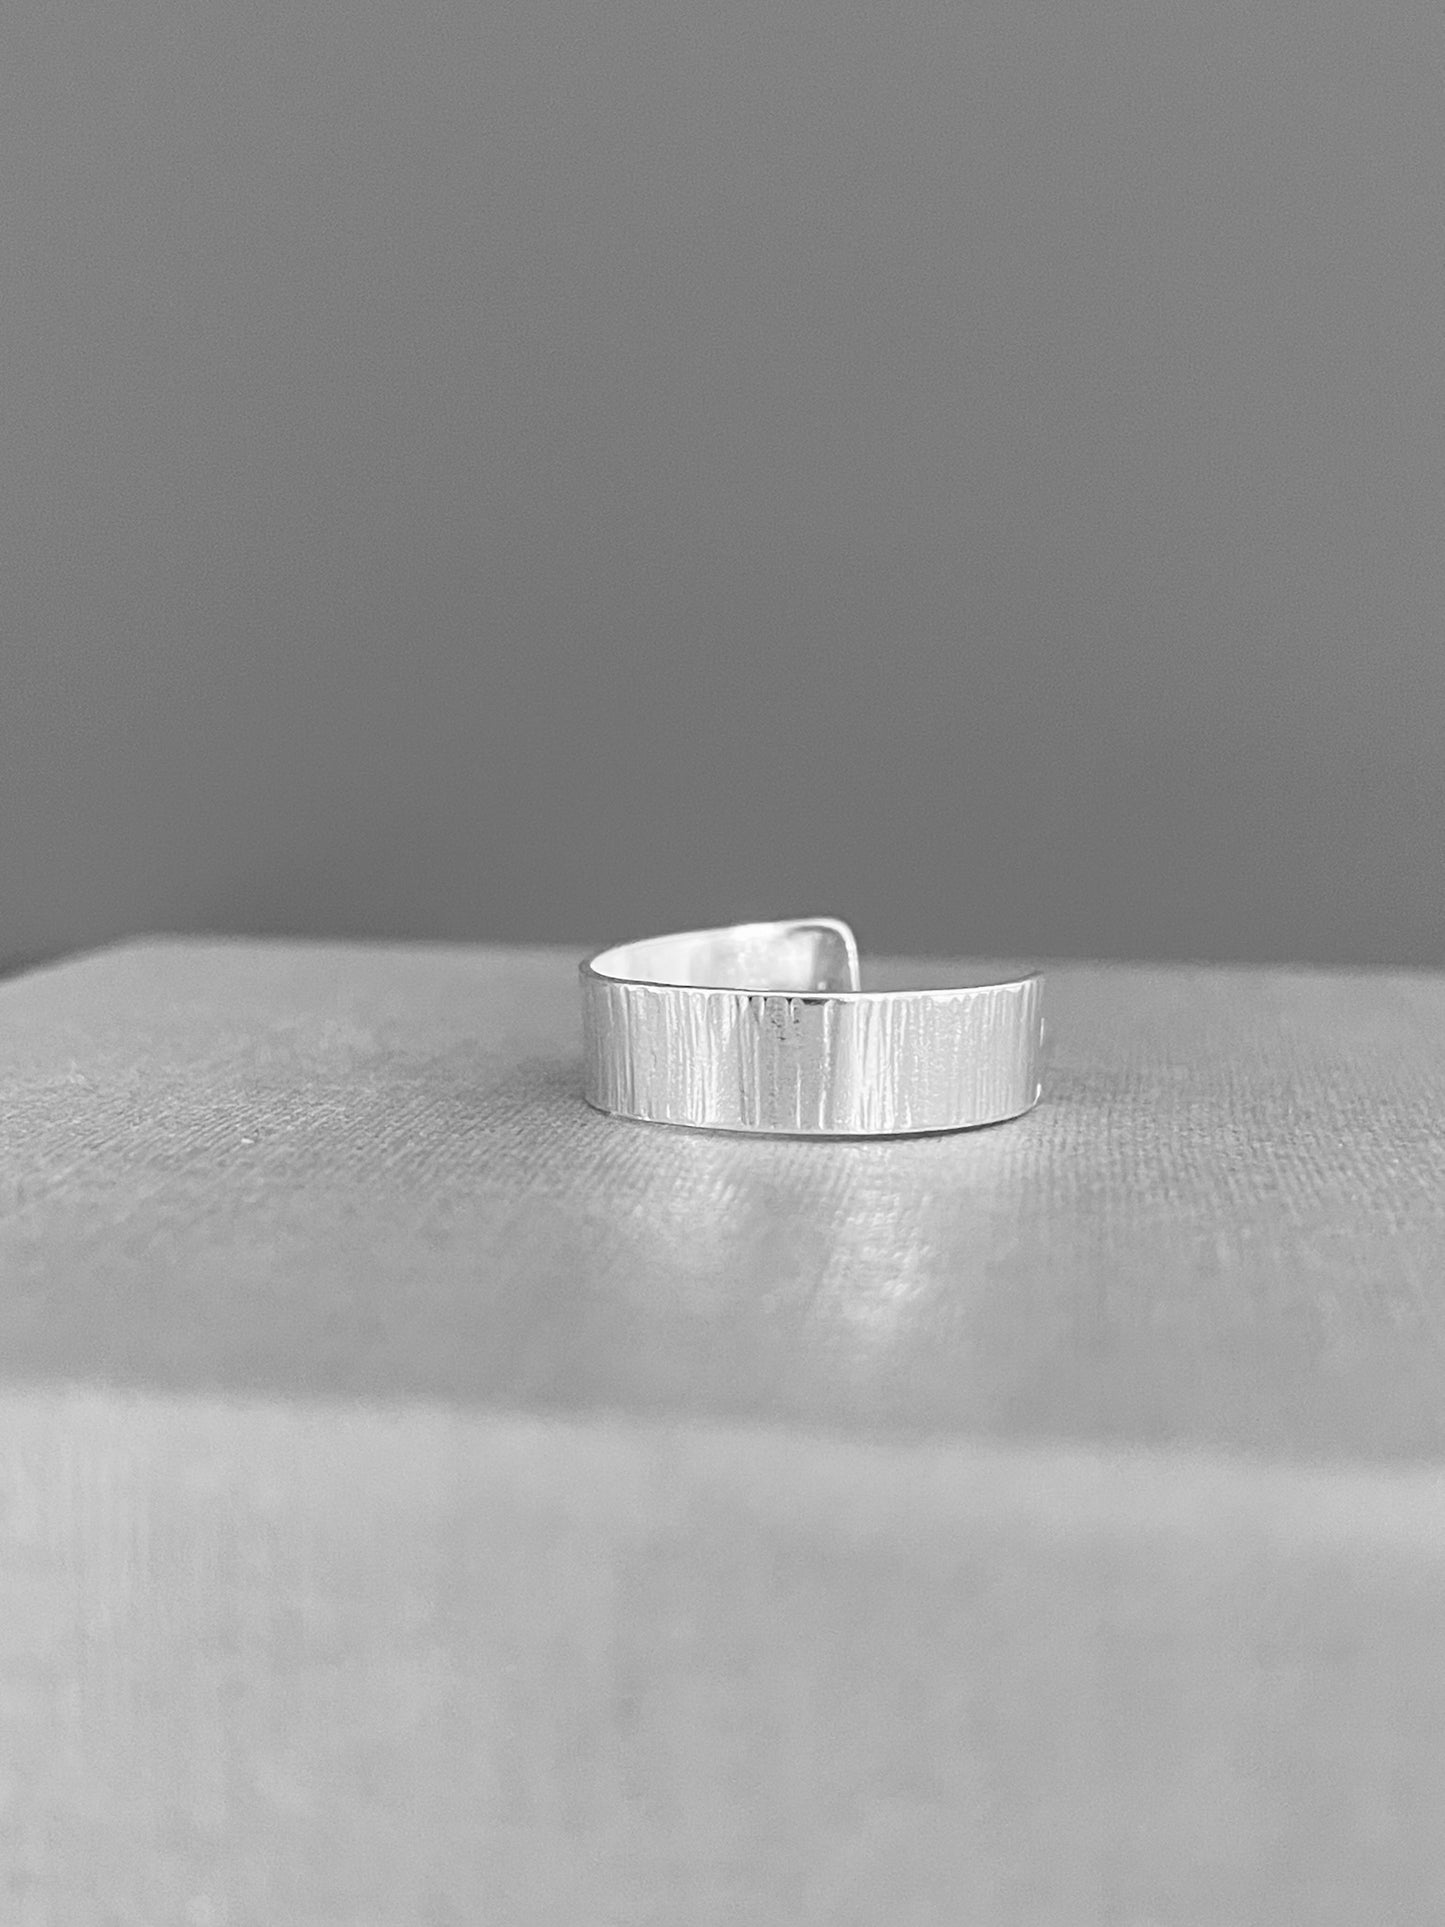 Sterling silver toe ring, adjustable toe ring